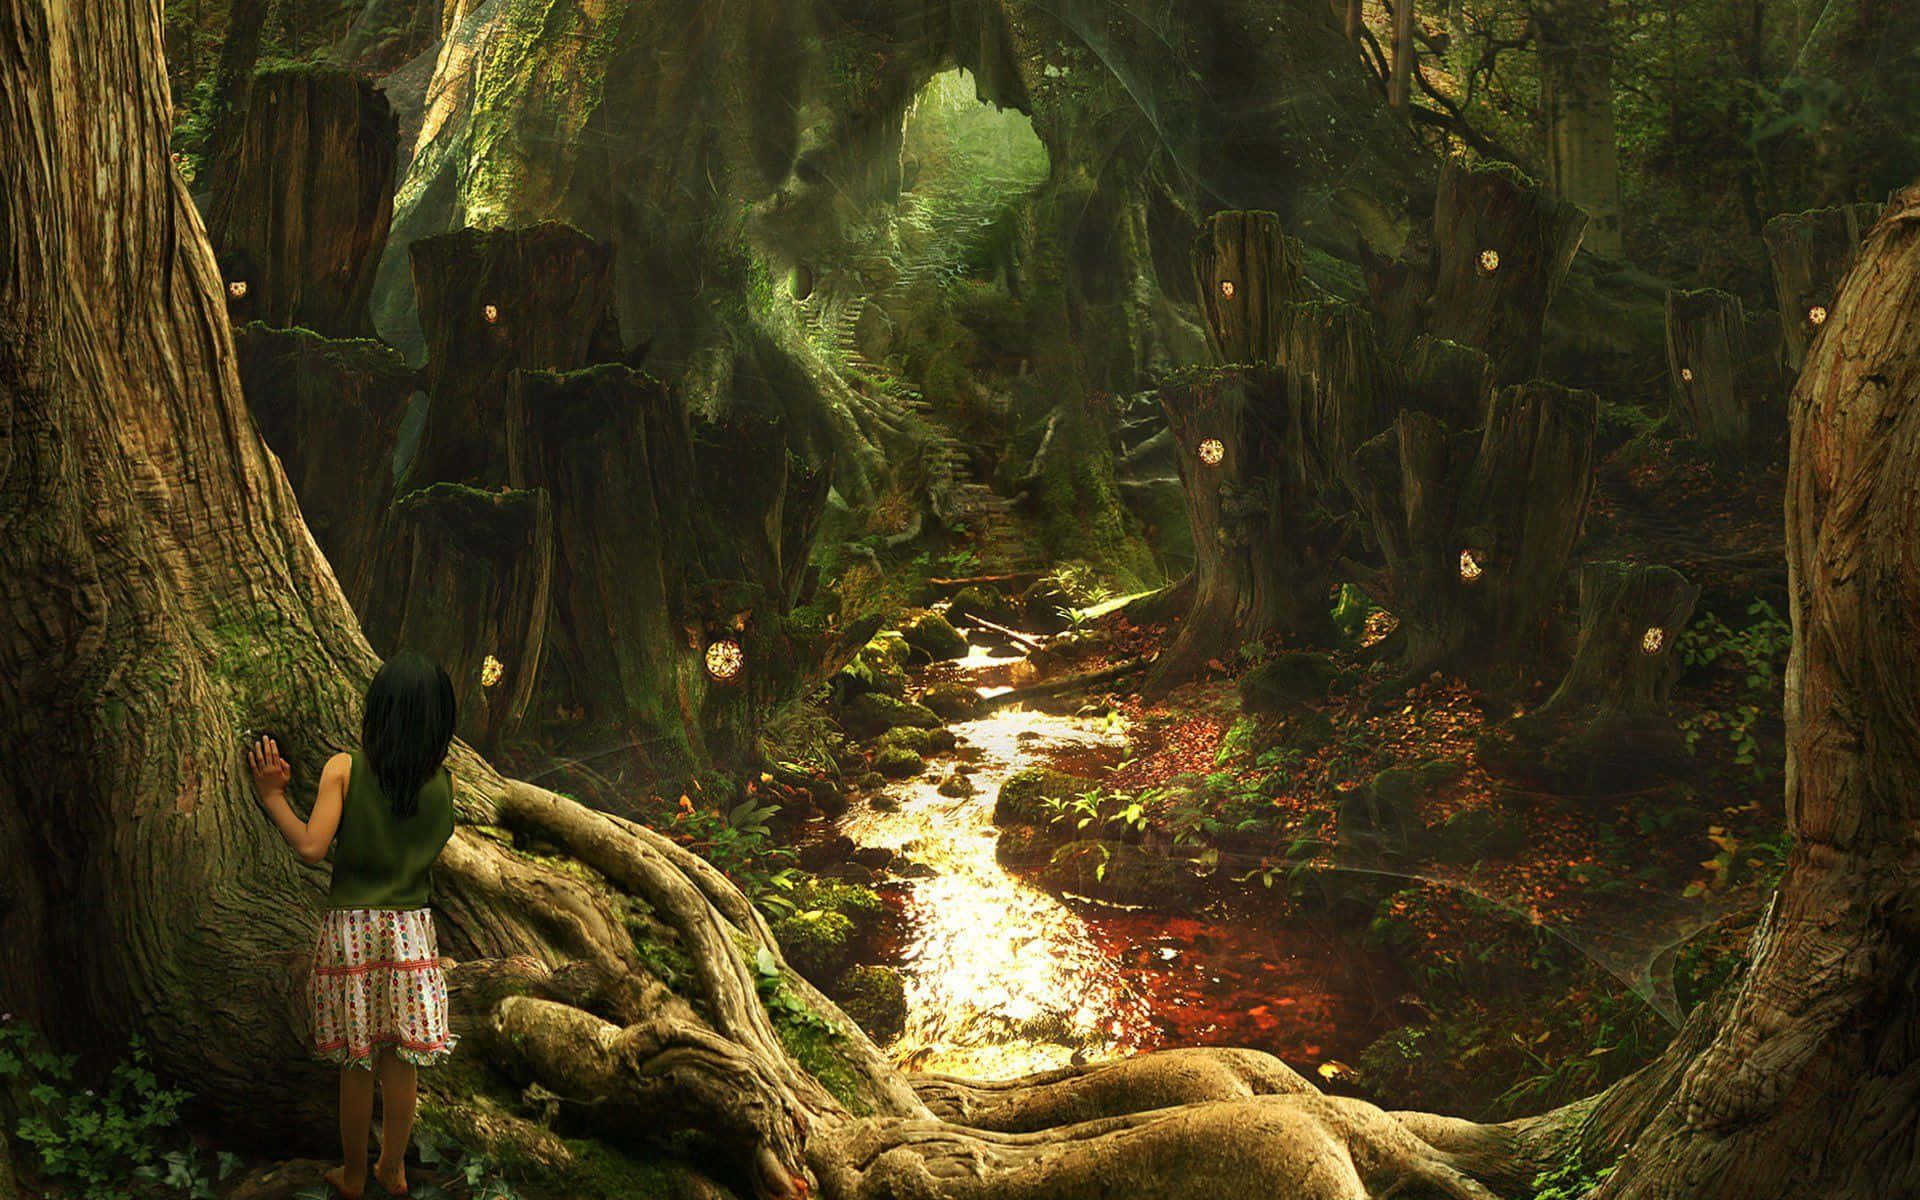 "Explore the mysteries of a Magical Forest"